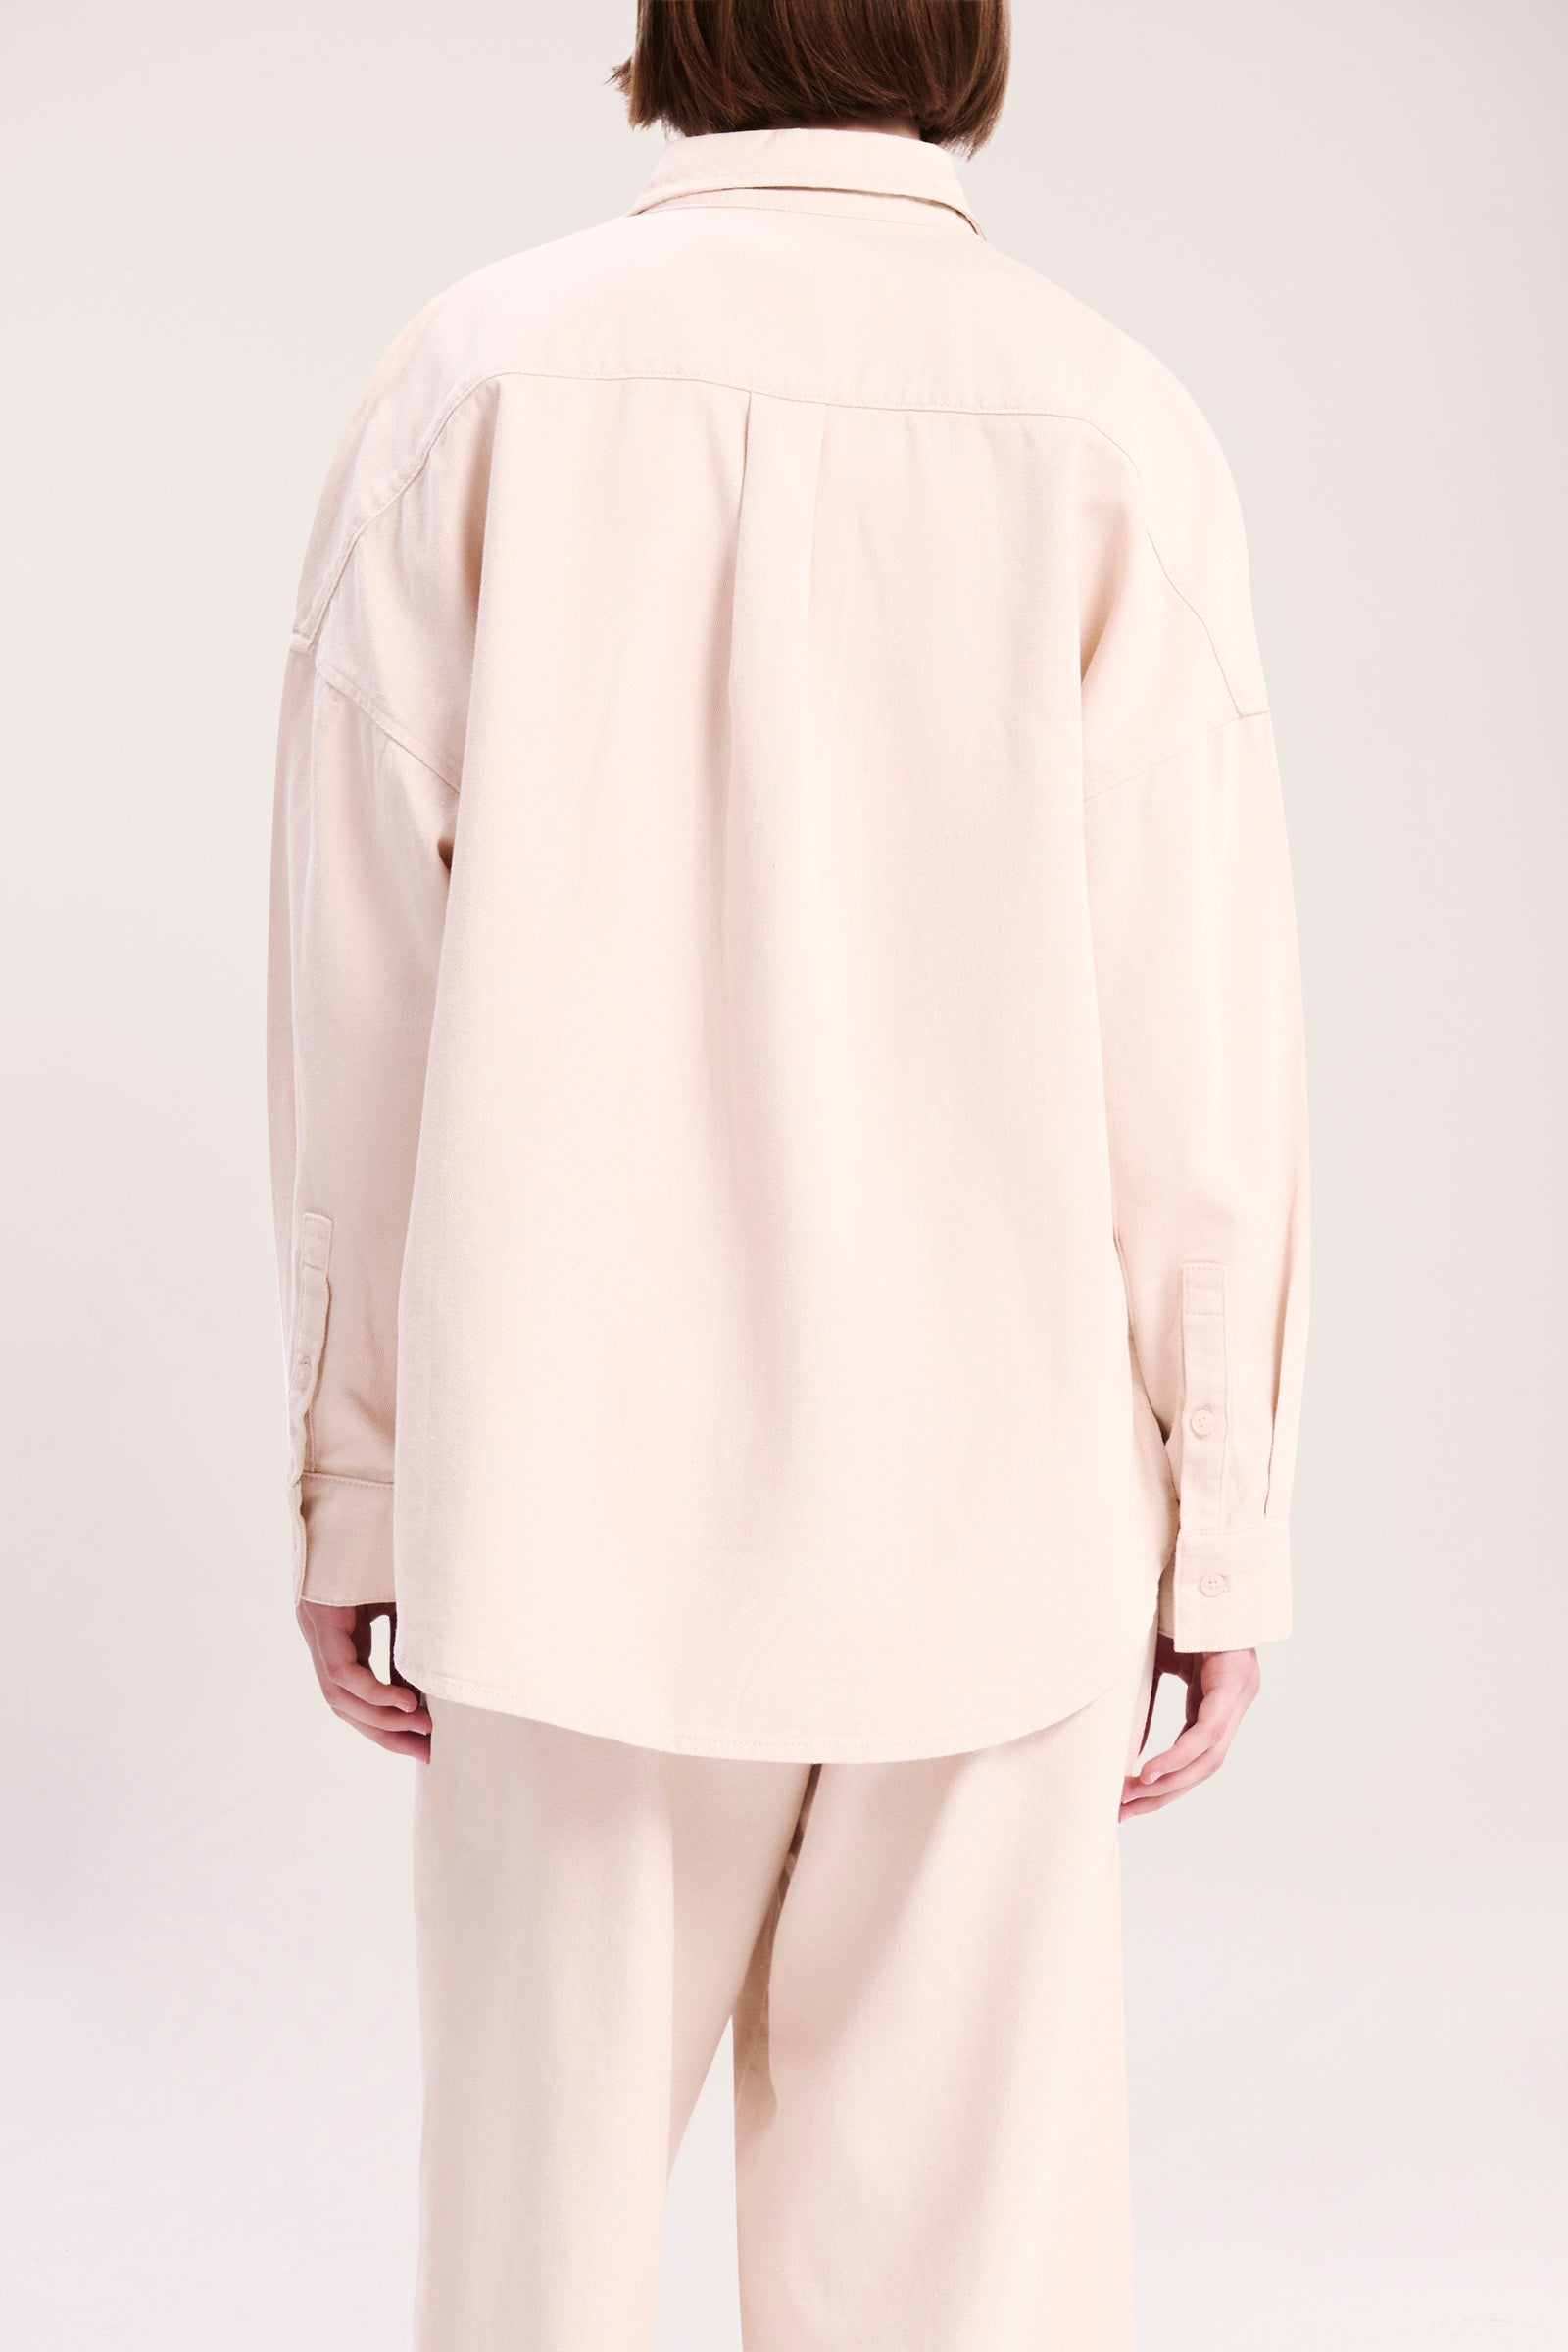 Nude Lucy Brookes Shirt in White Cloud